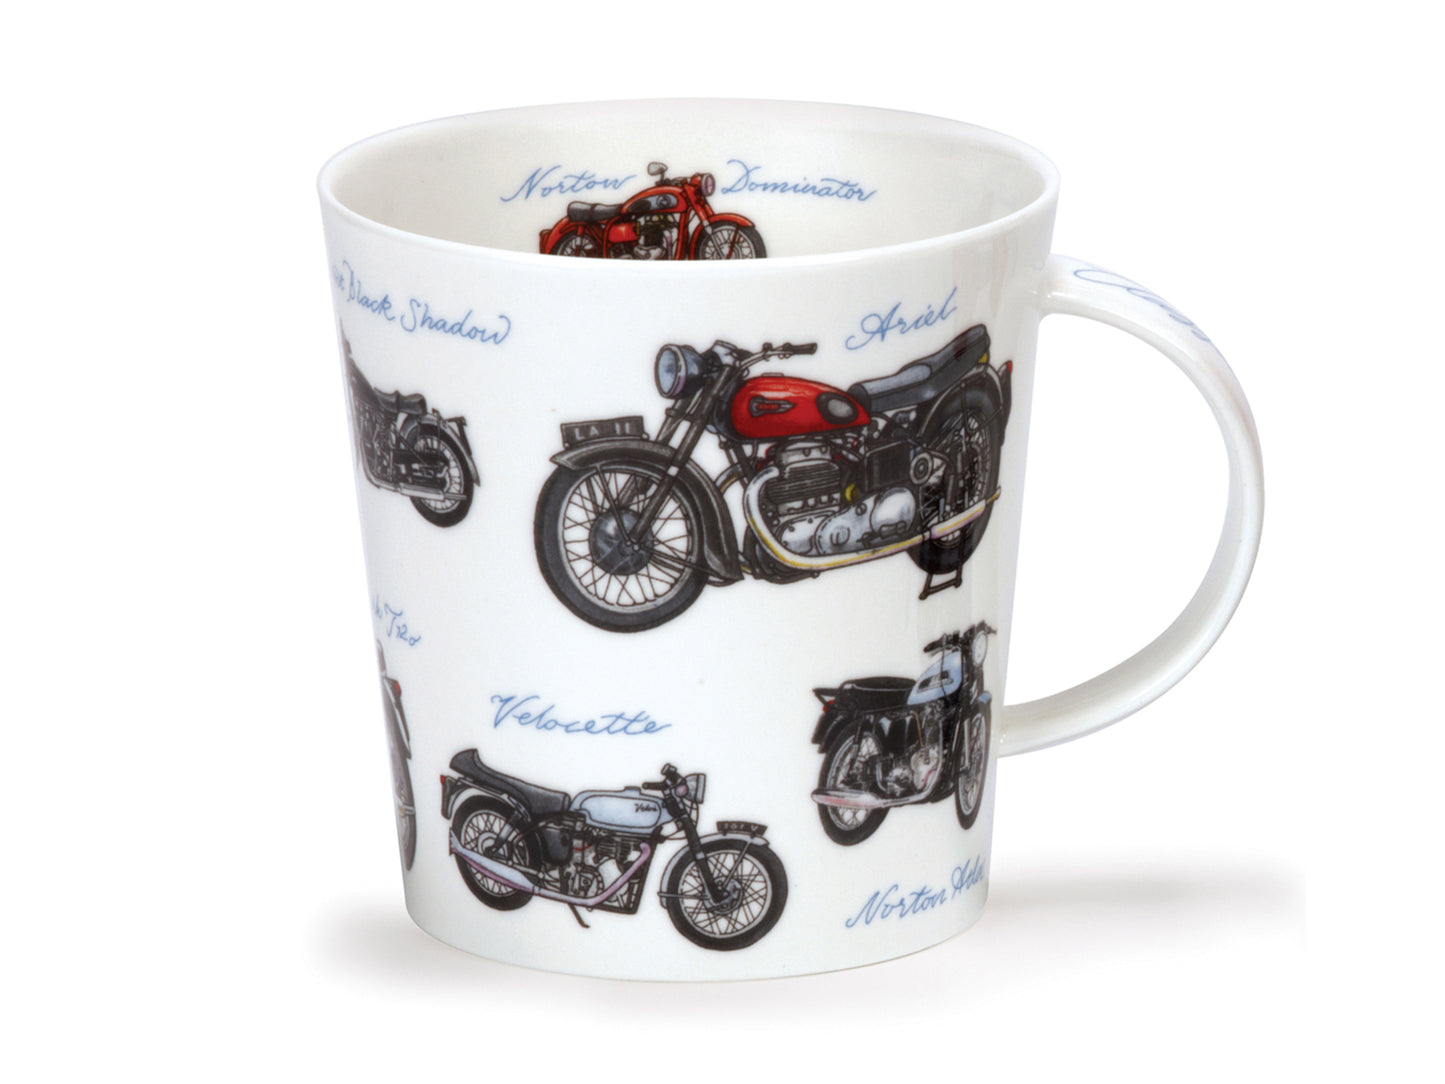 This Dunoon Cairngorm Classic Collection Motorbikes mug is made of a fine bone china and is printed with varying designs of retro motorbikes around its exterior, along with their appropriate labels. There are also two labelled motorcycles printed opposite one another around the inner rim of the mug.